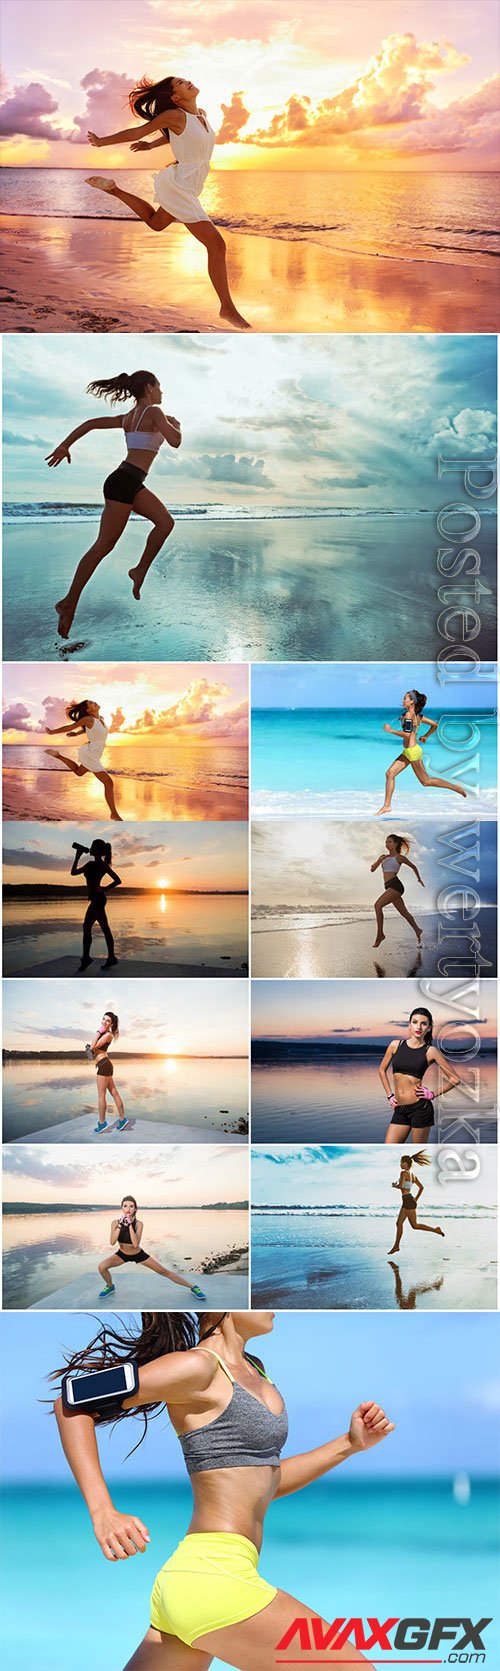 Girls doing sports by the sea stock photo